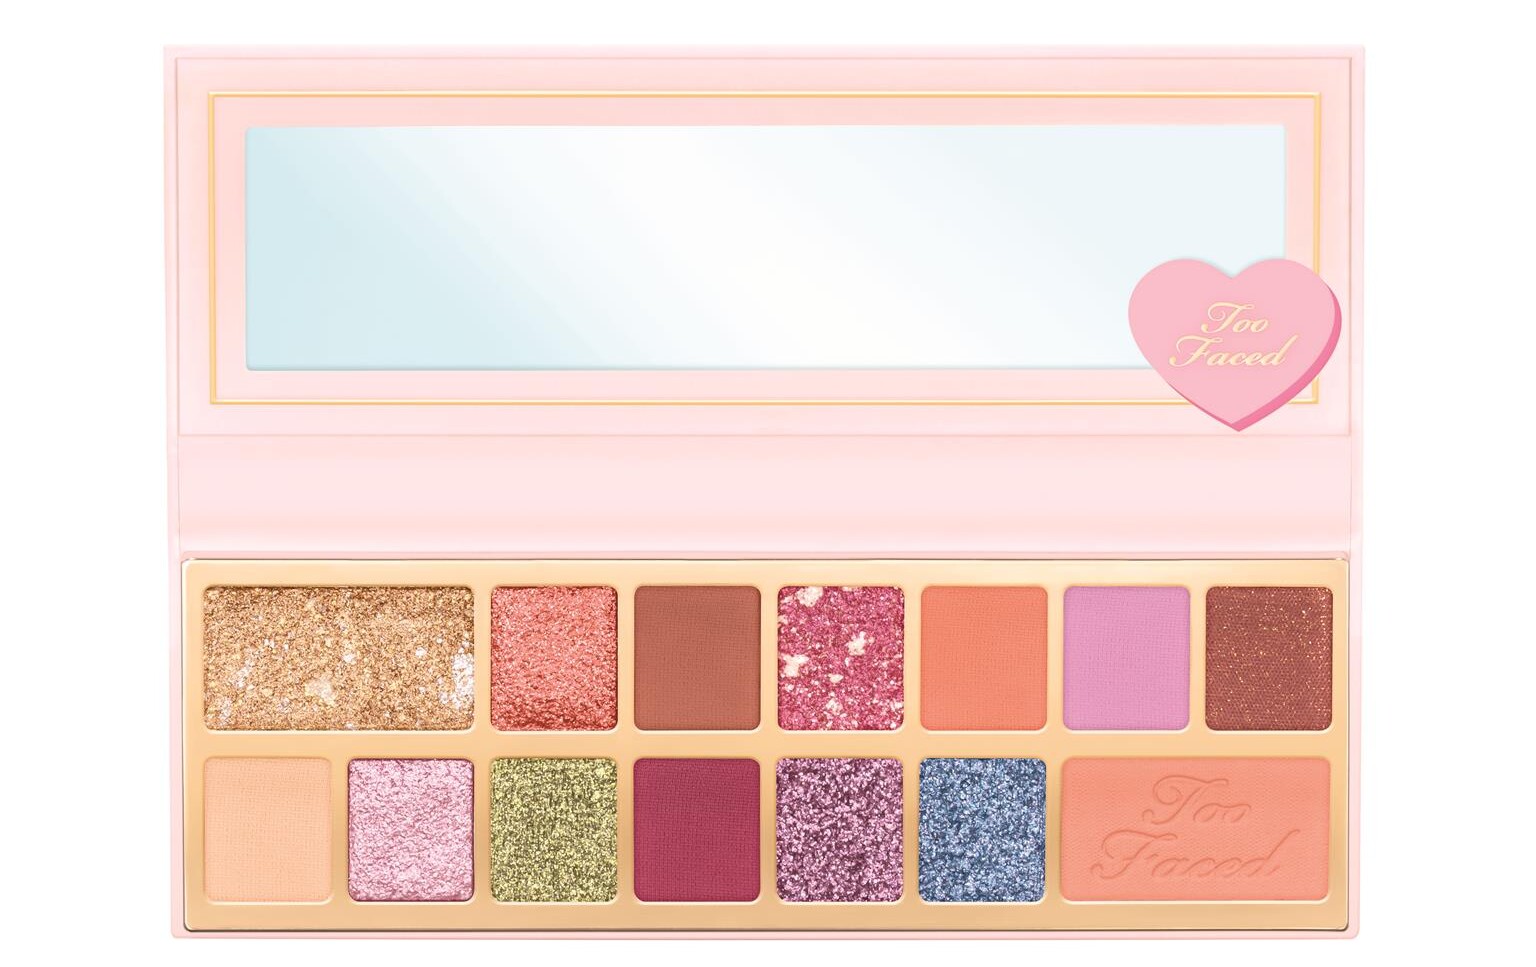 Too Faced_Pinker Times Ahead